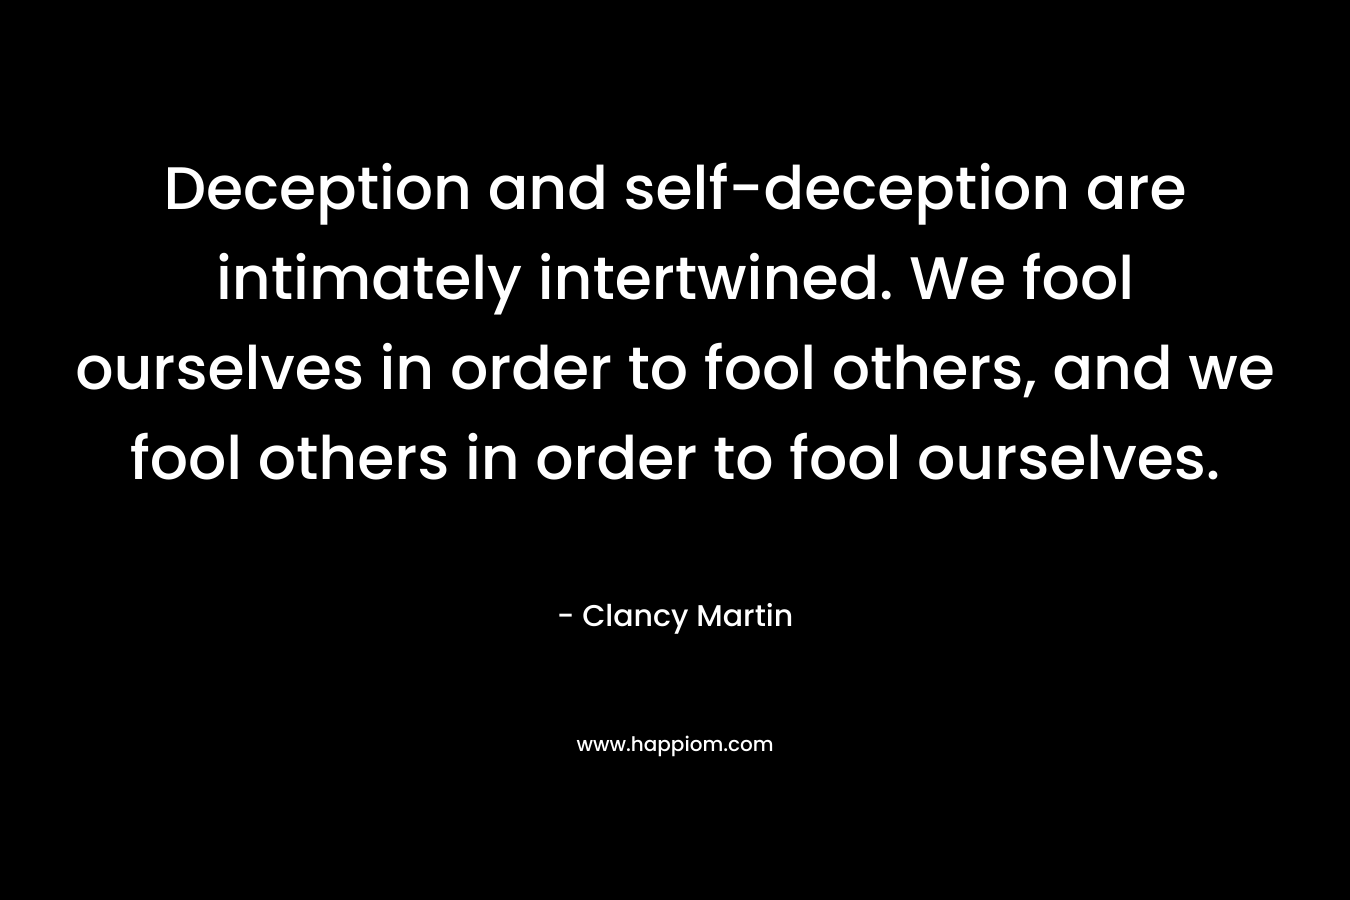 Deception and self-deception are intimately intertwined. We fool ourselves in order to fool others, and we fool others in order to fool ourselves.